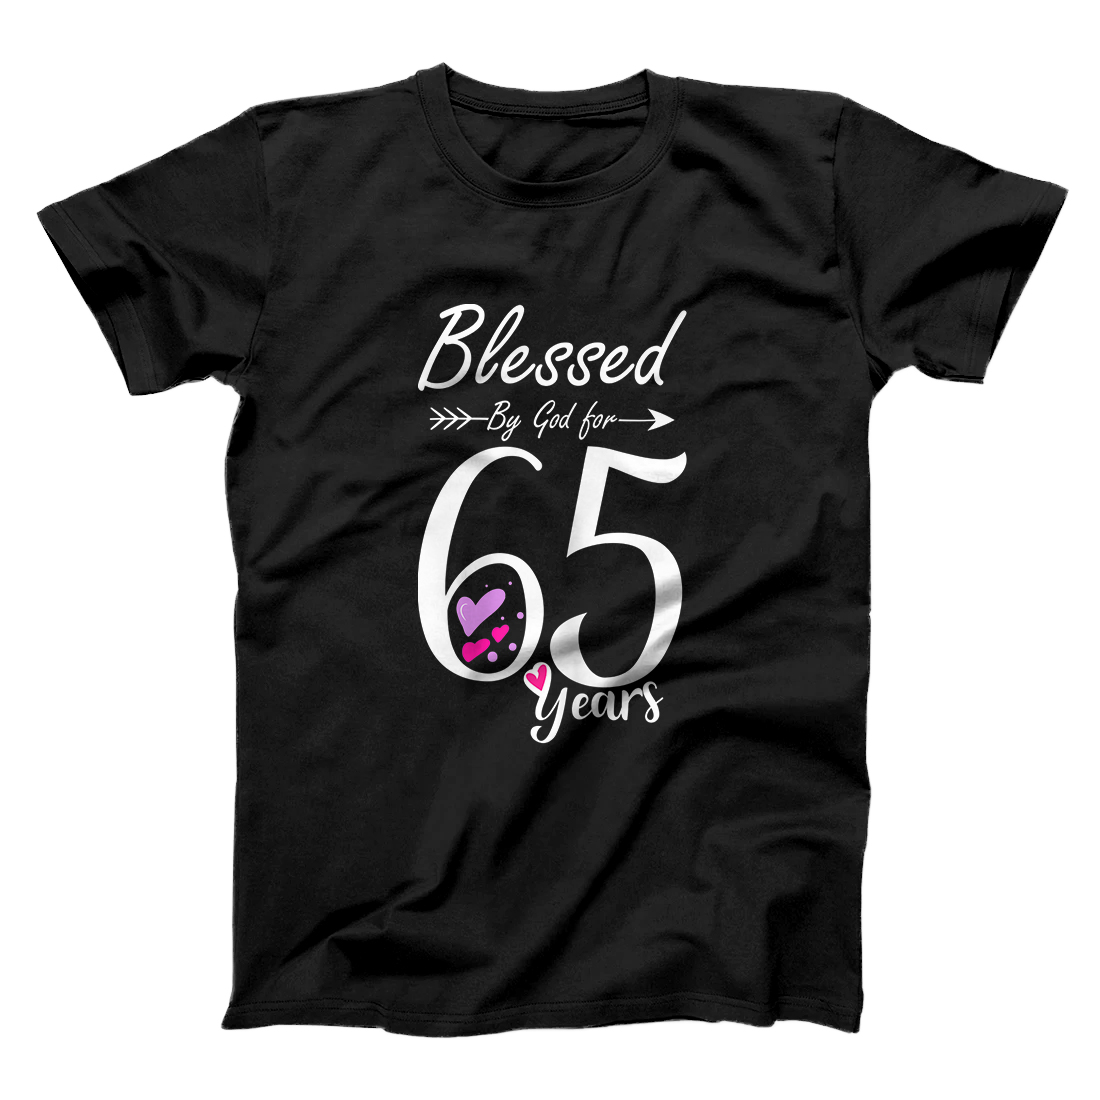 Personalized Womens 65th Birthday Tee Gift and Blessed for 65 Years Birthday T-Shirt